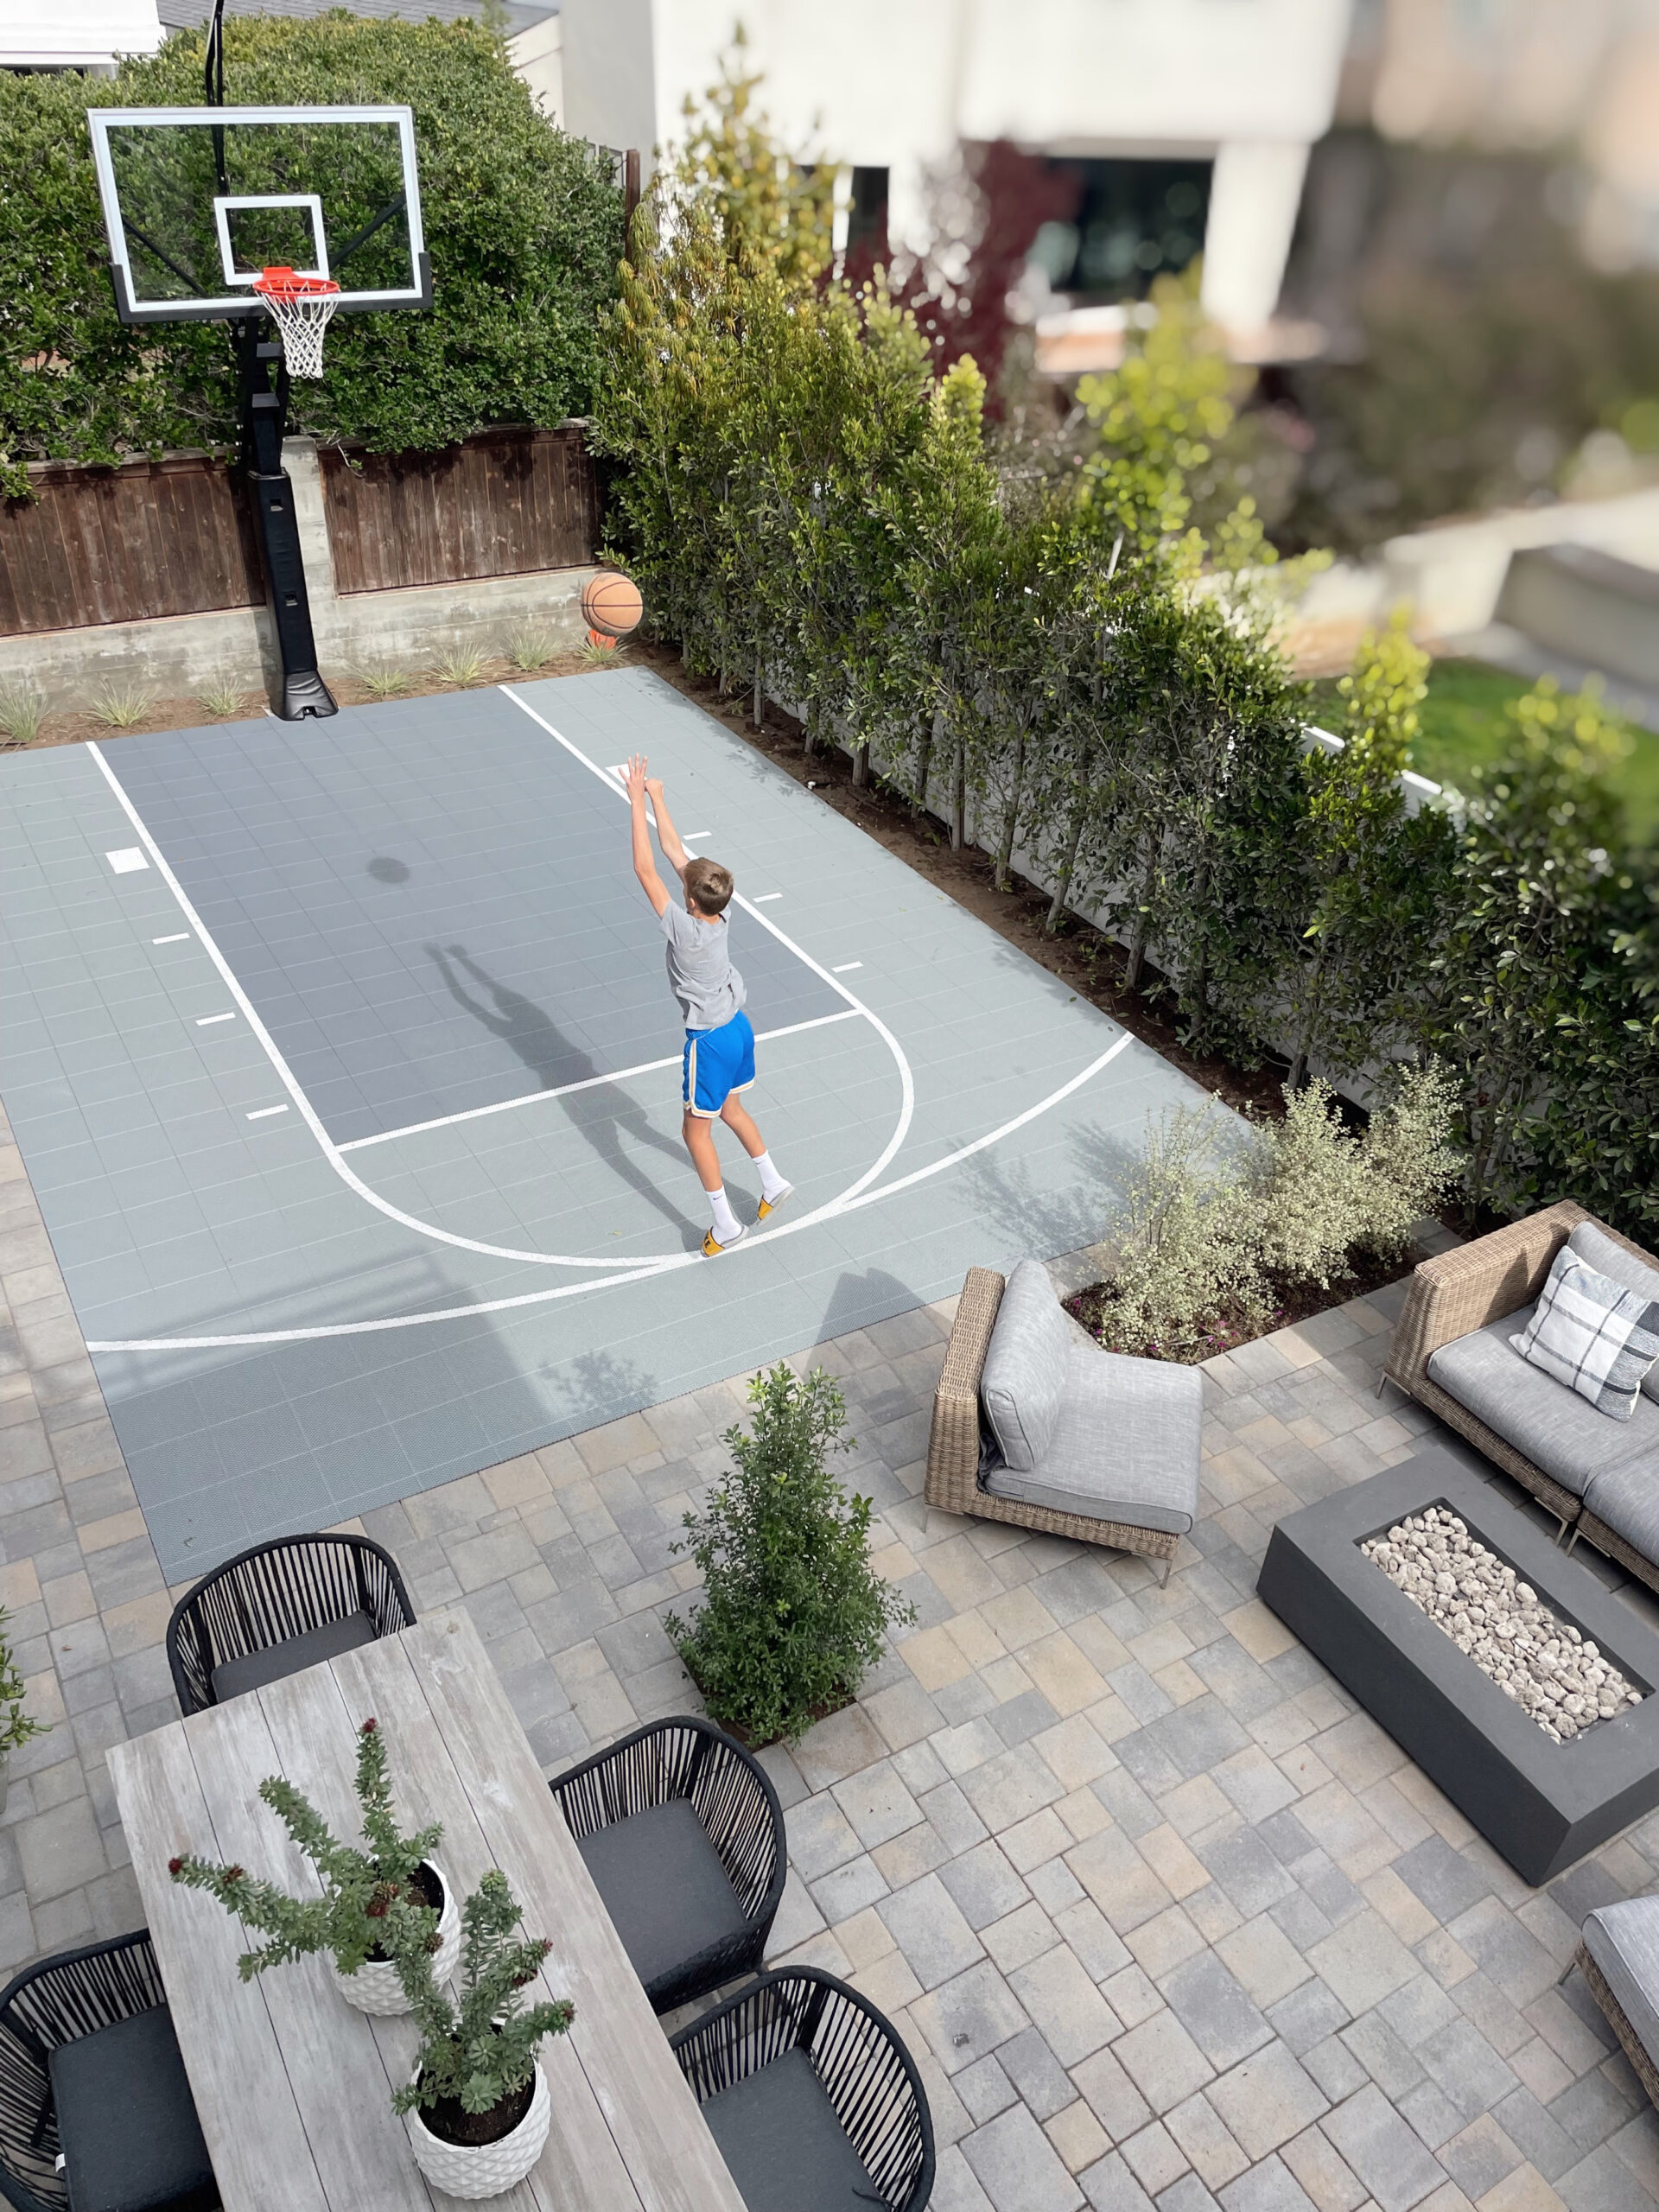 backyard transformation with a basketball court!